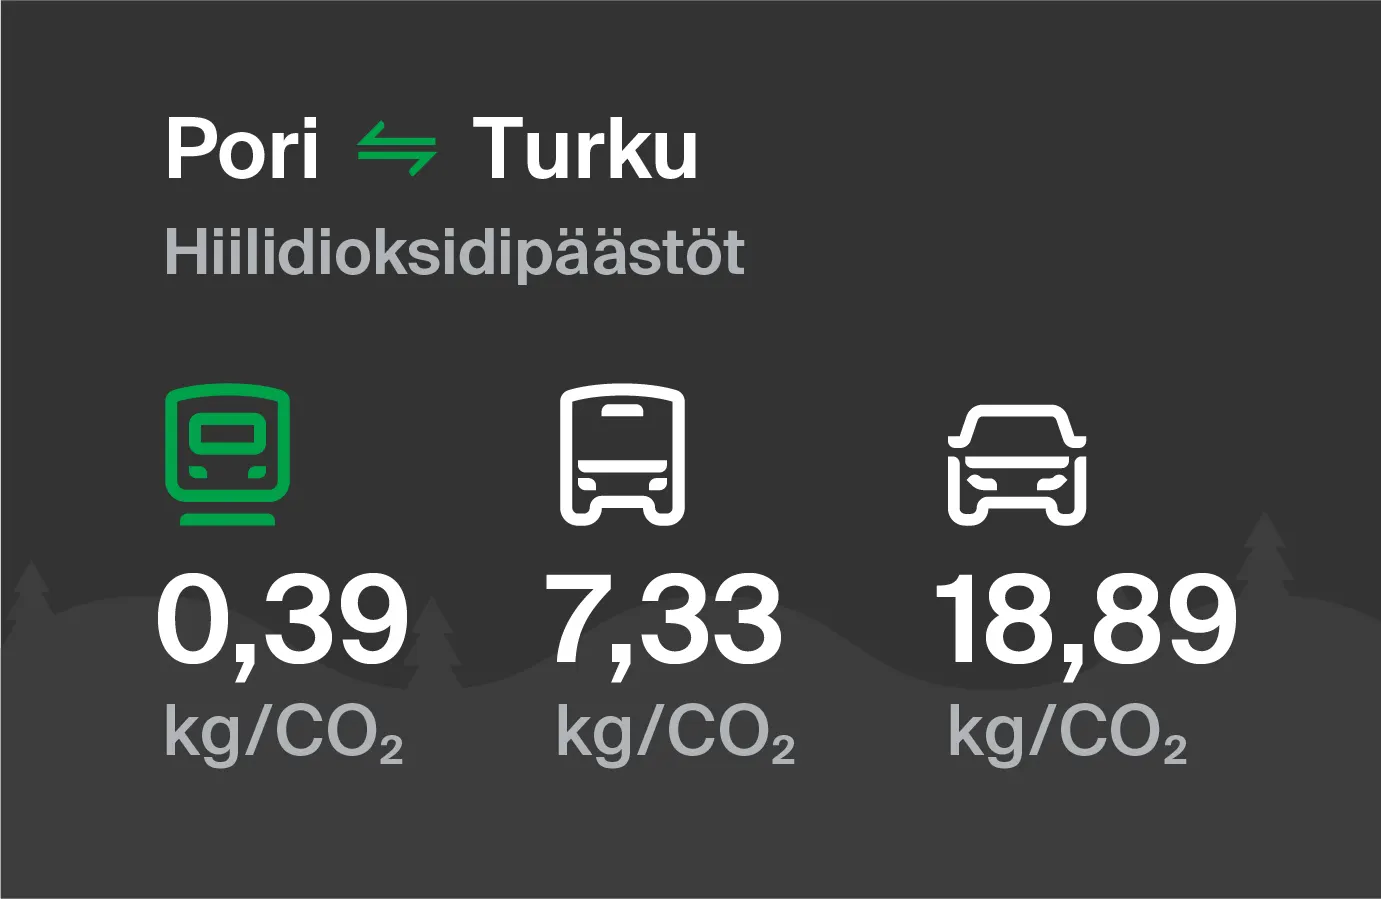 Carbon dioxide emissions from Pori to Turku by different modes of transport: by train 0.39 kg/CO2, by bus 7.33 kg/CO2 and by car 18.89 kg/CO2.